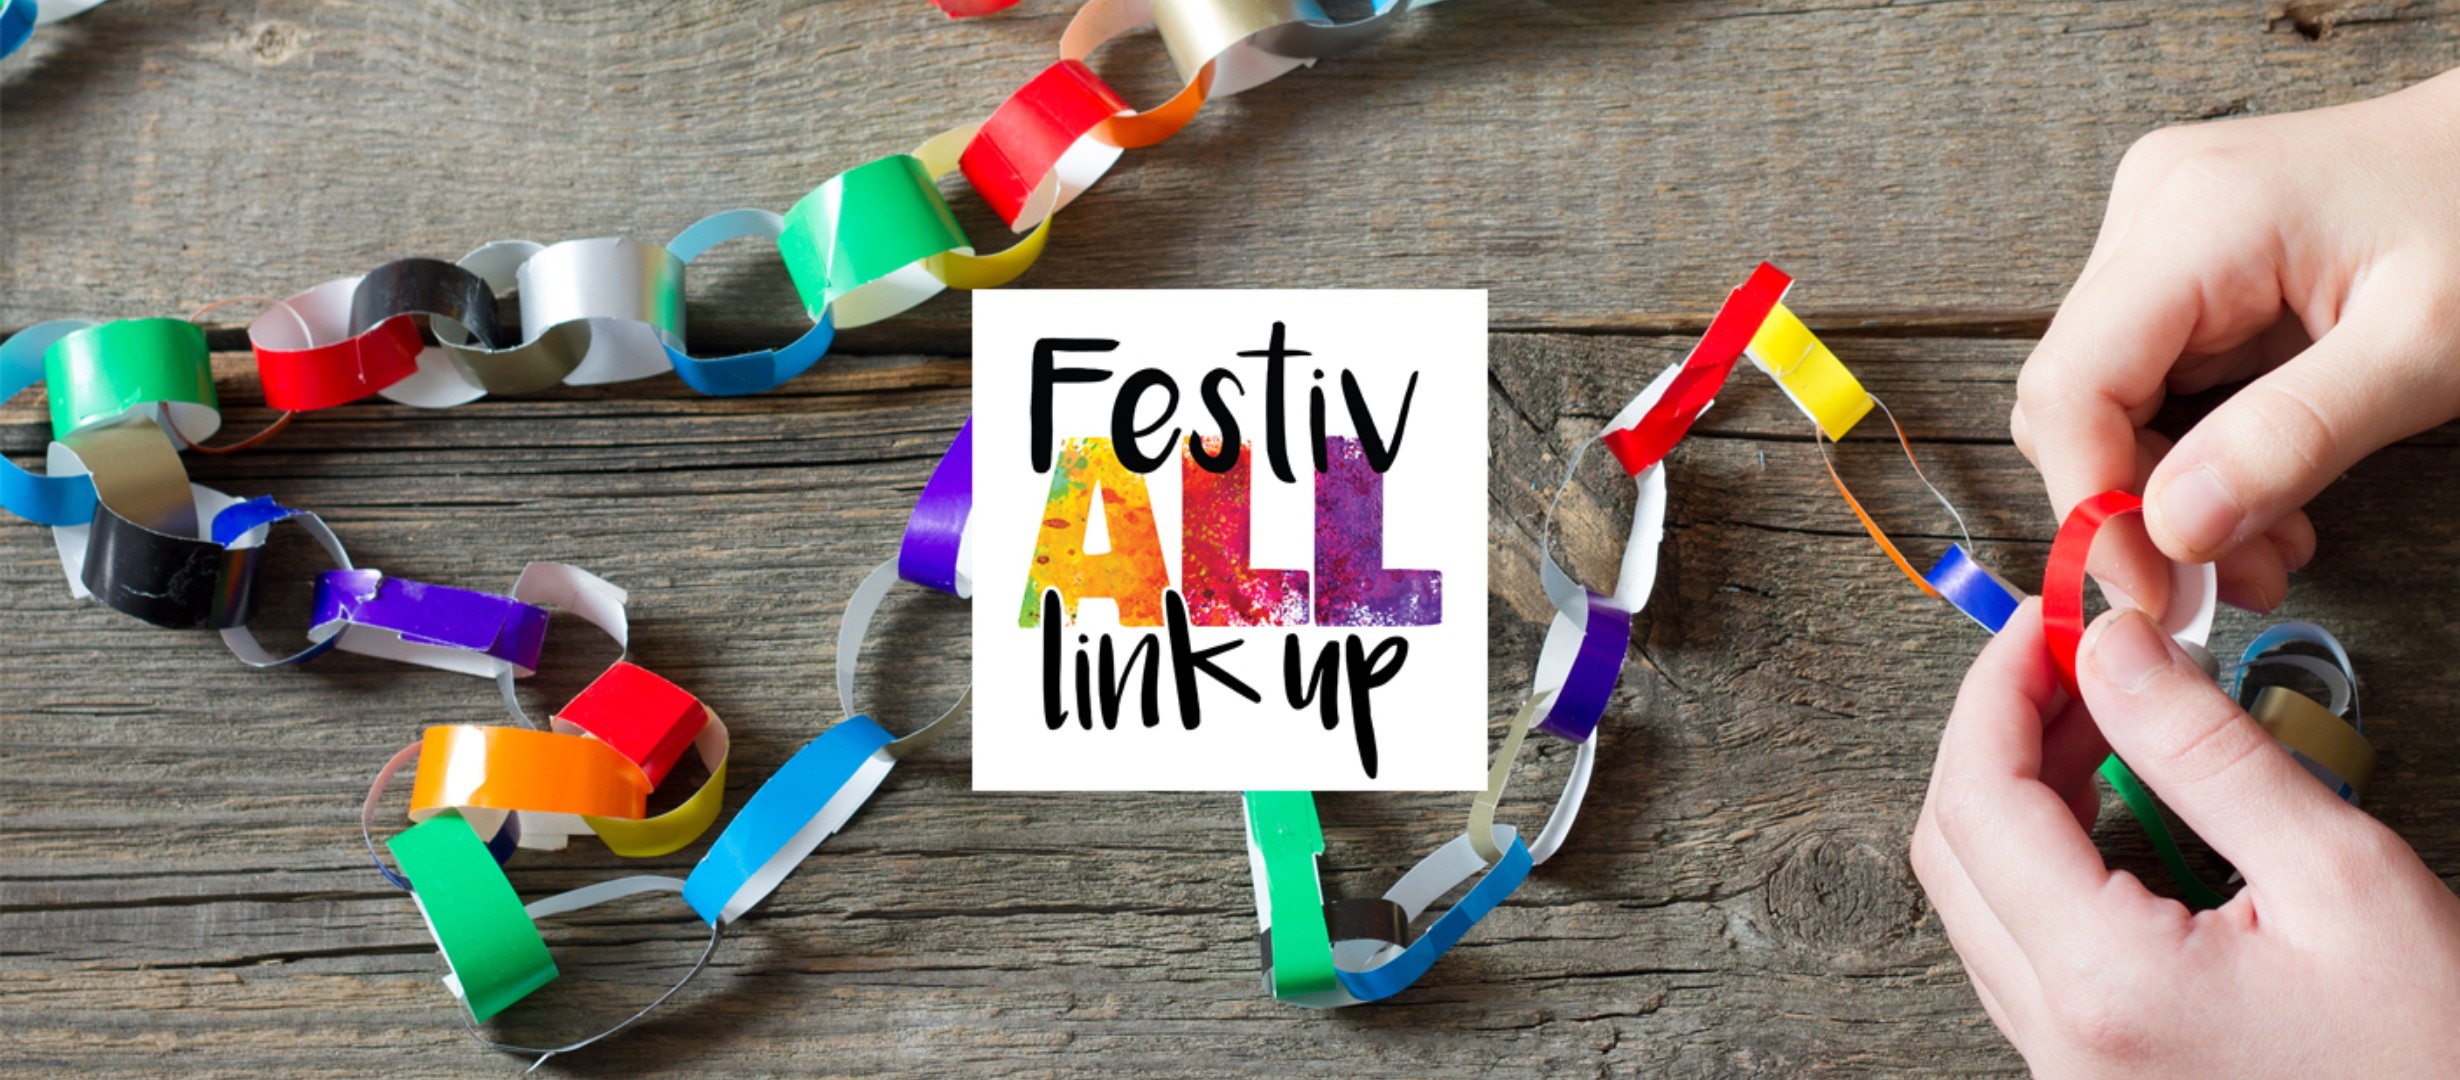 Festivall link up logo, pair of hands making paper chains